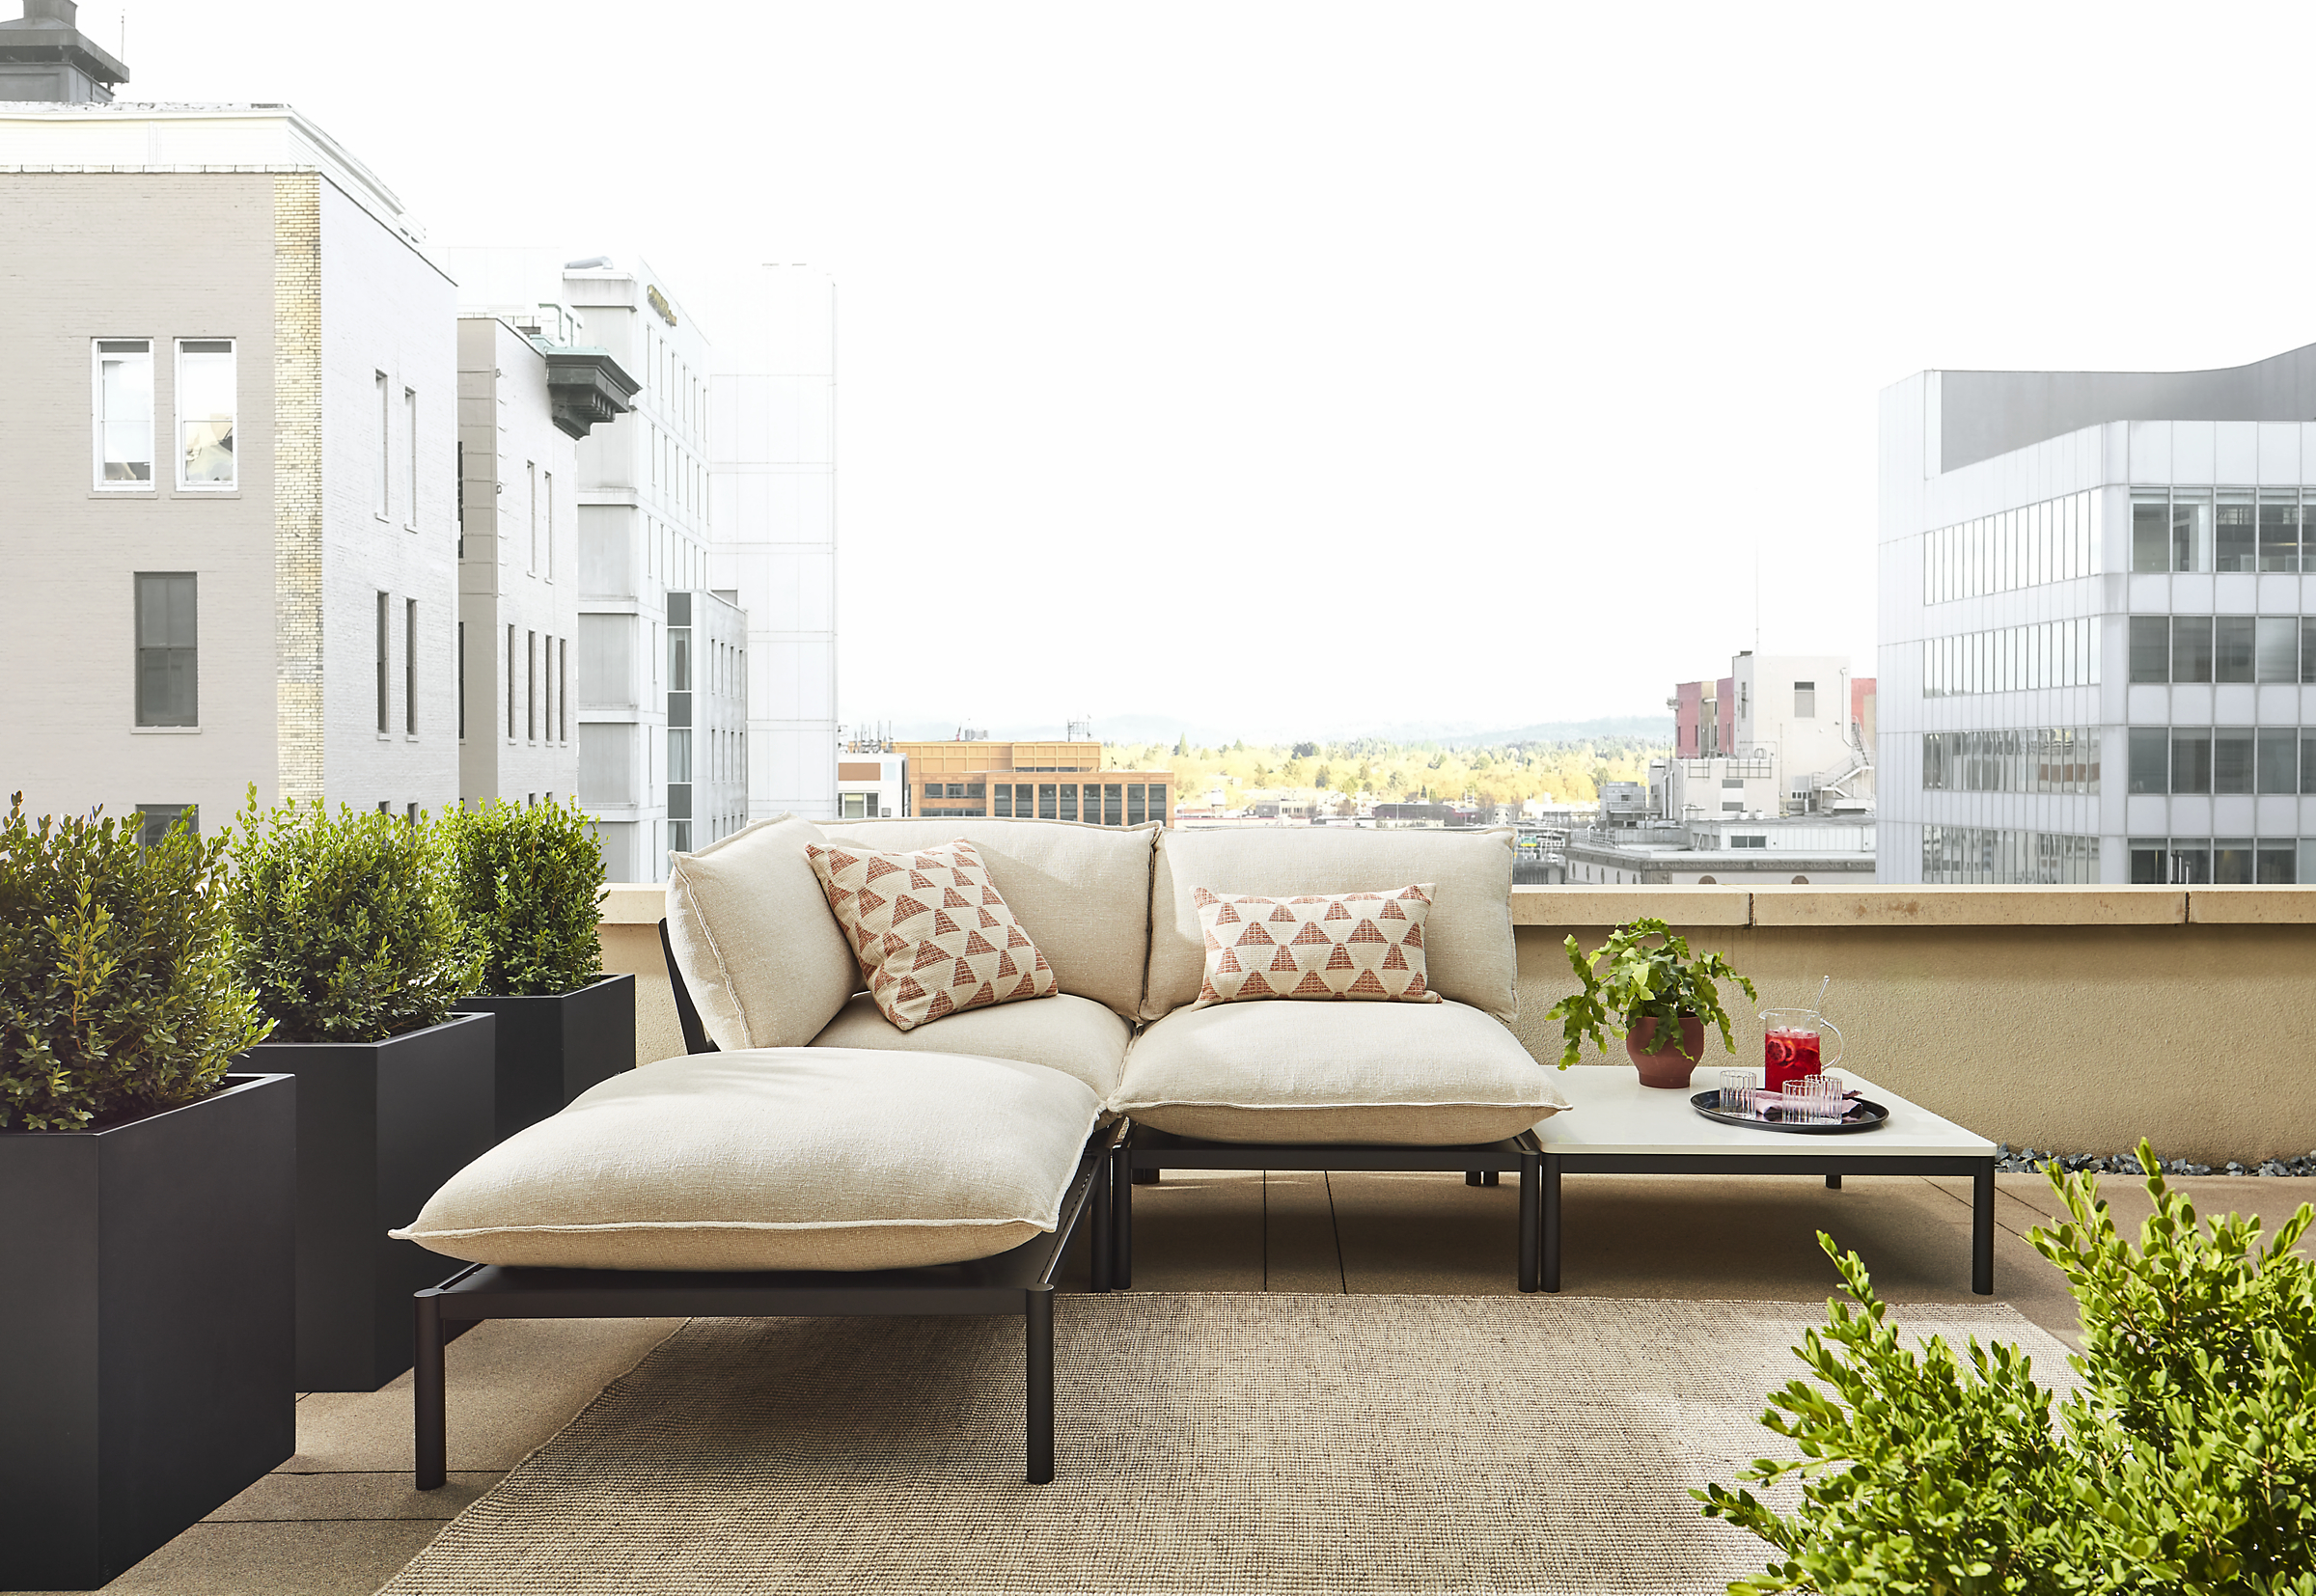 Westbrook 4-piece sectional in graphite with Nevan oatmeal cushions and marbled white quartz top on outdoor balcony.